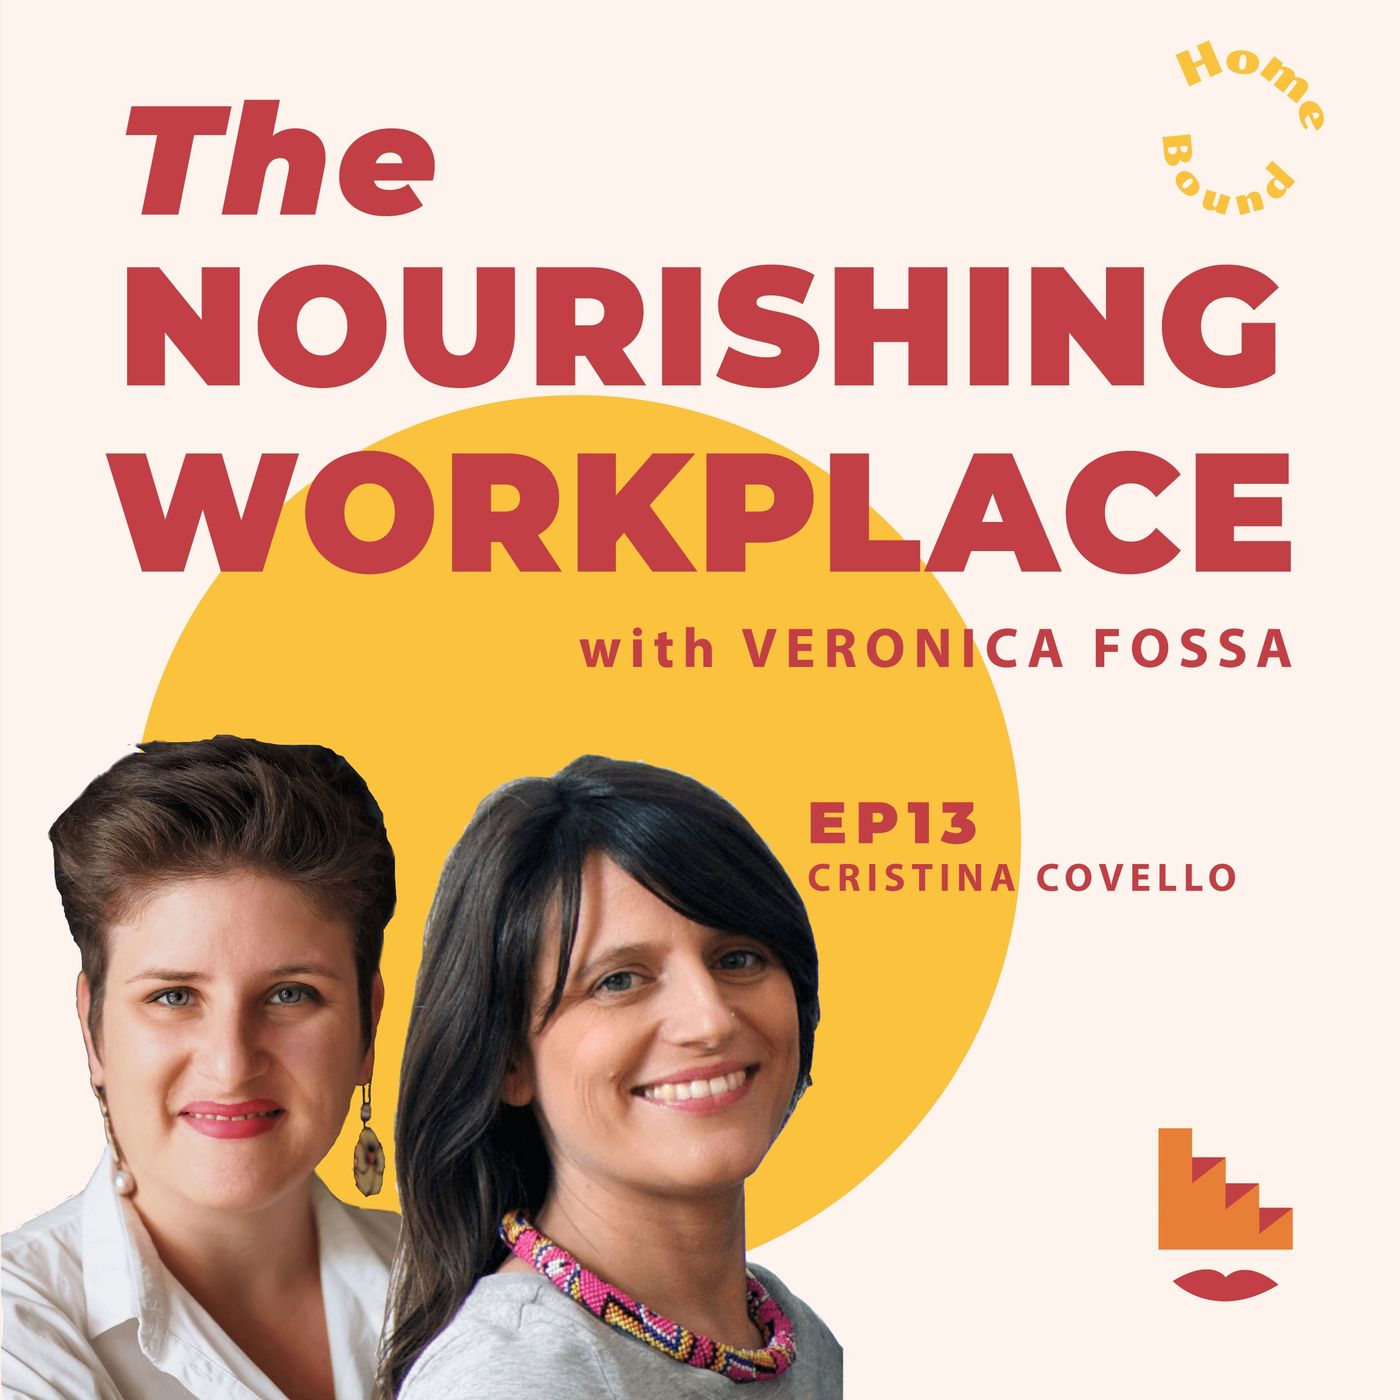 The Power of Food for Connection with Fooditude's Cristina Covello